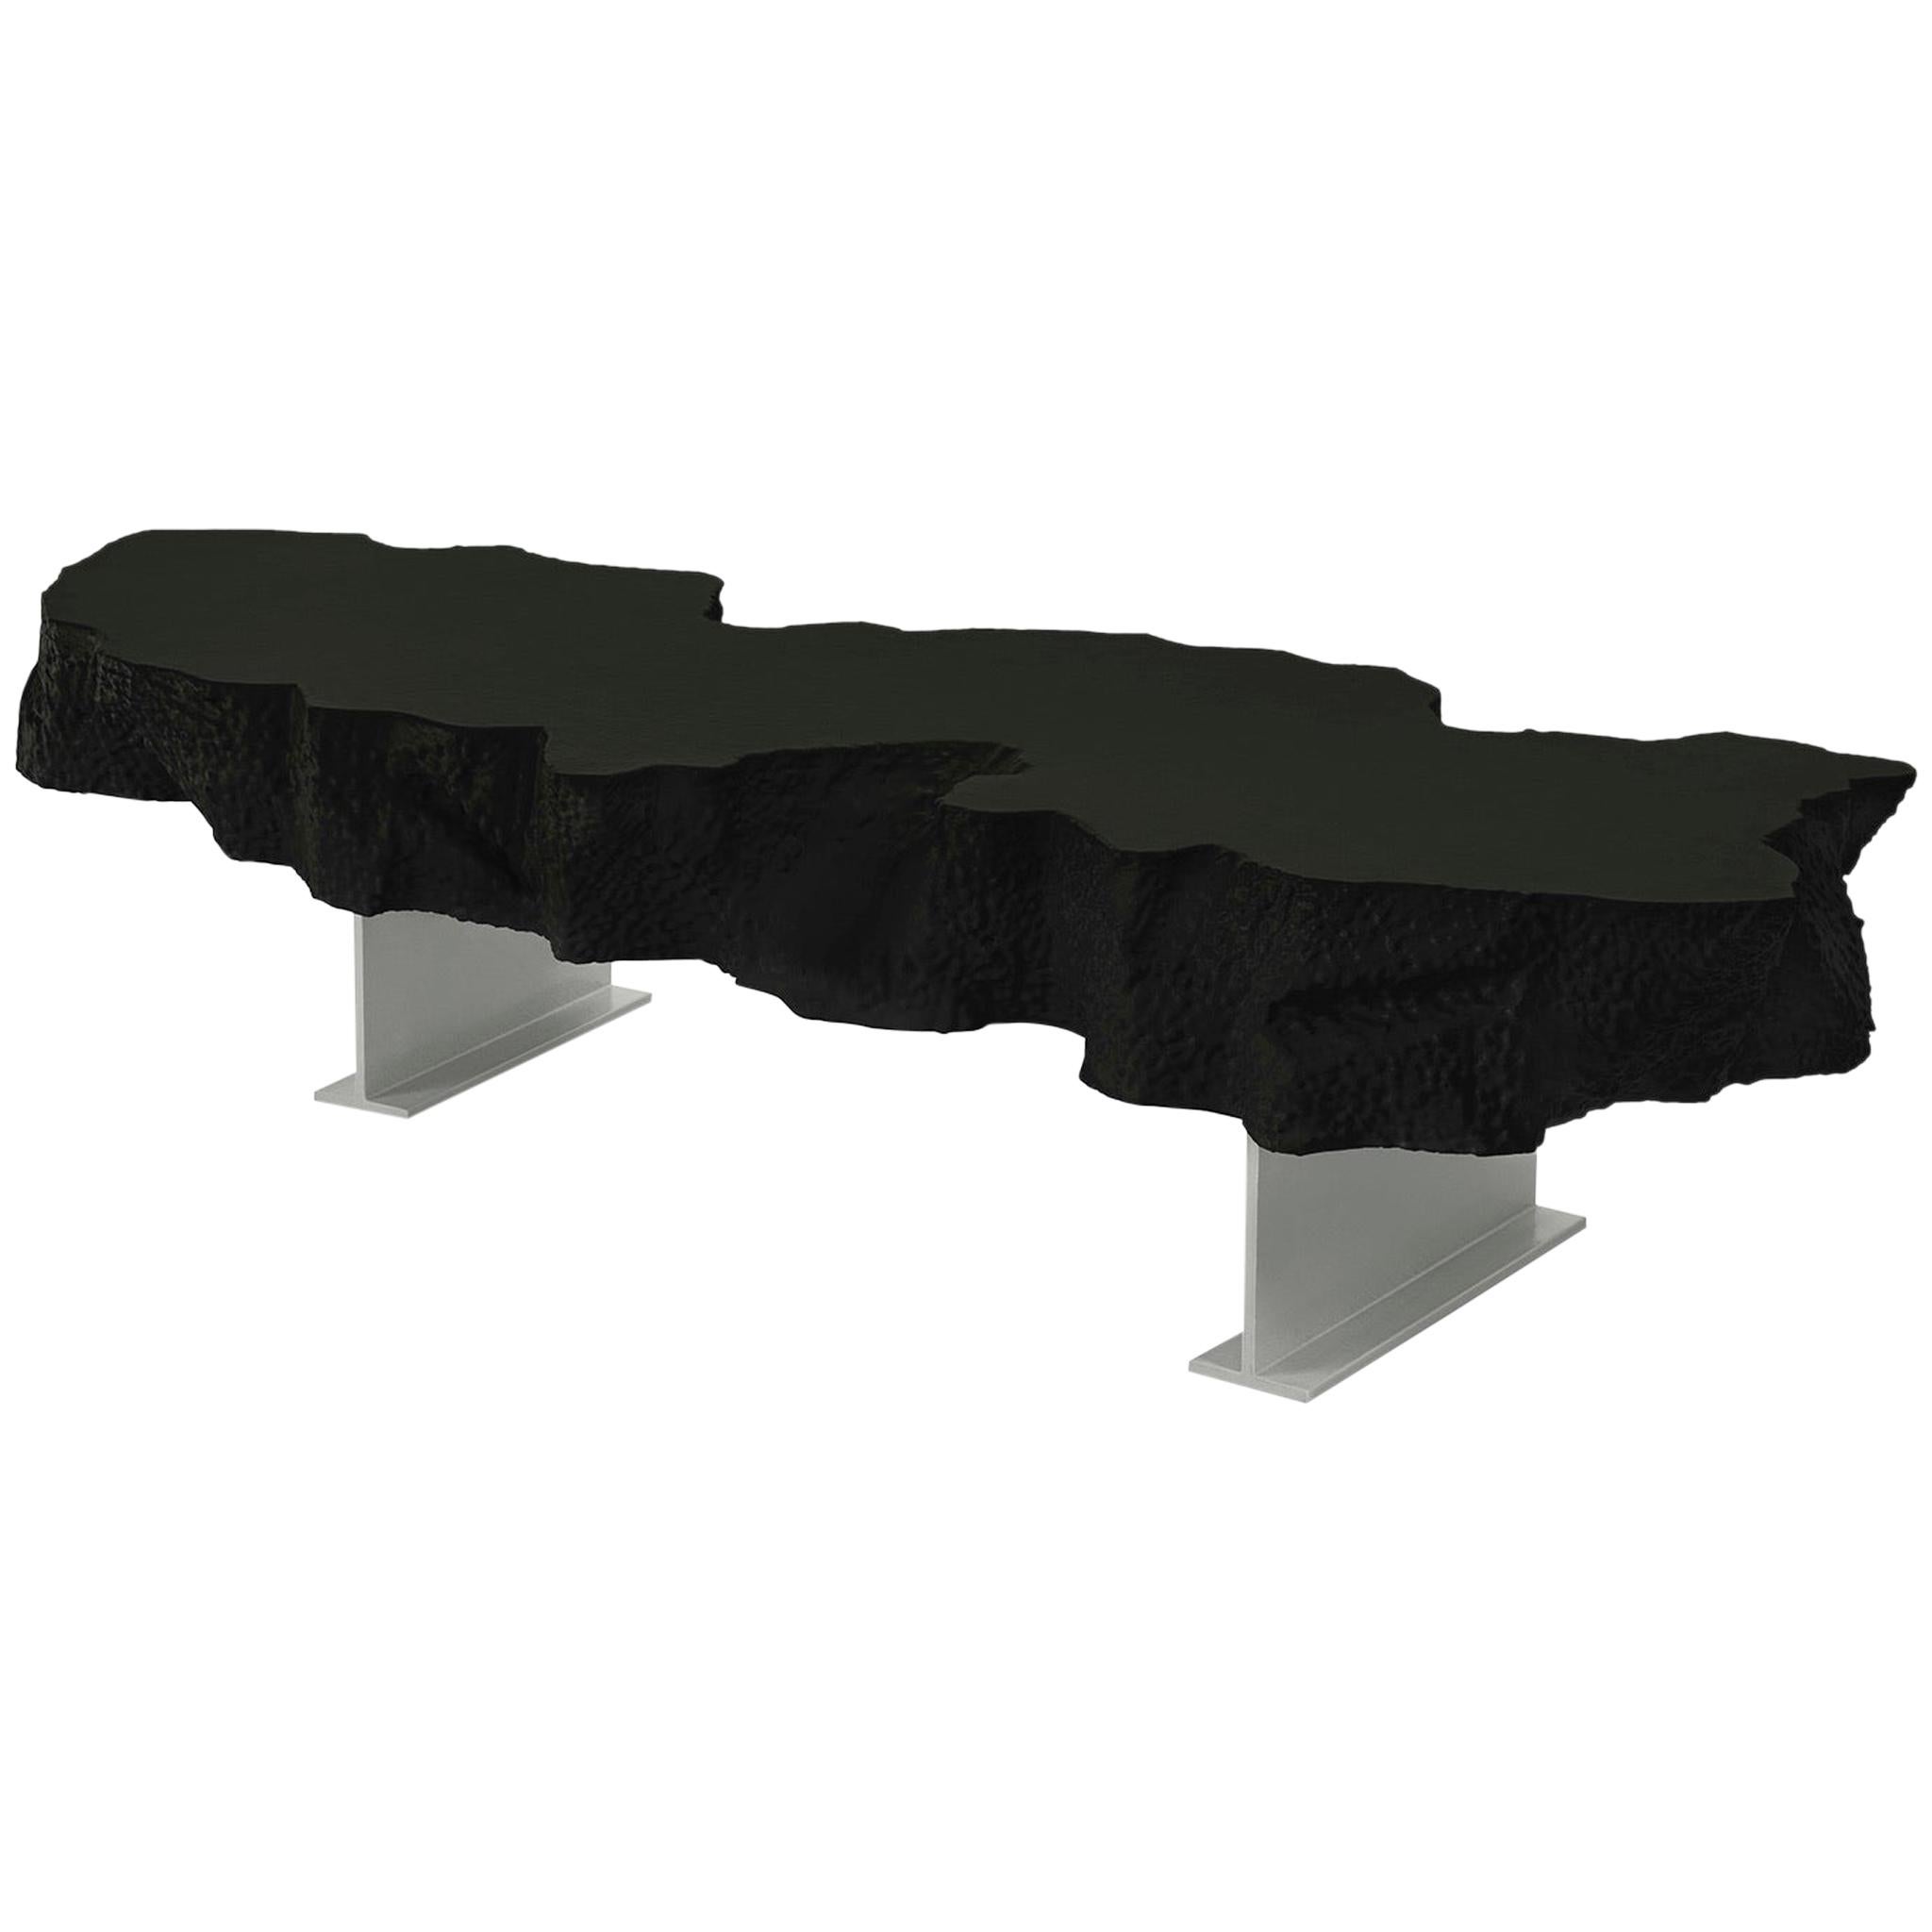 Gufram Broken Bench Black by Snarkitecture, Limited Edition of 77 For Sale